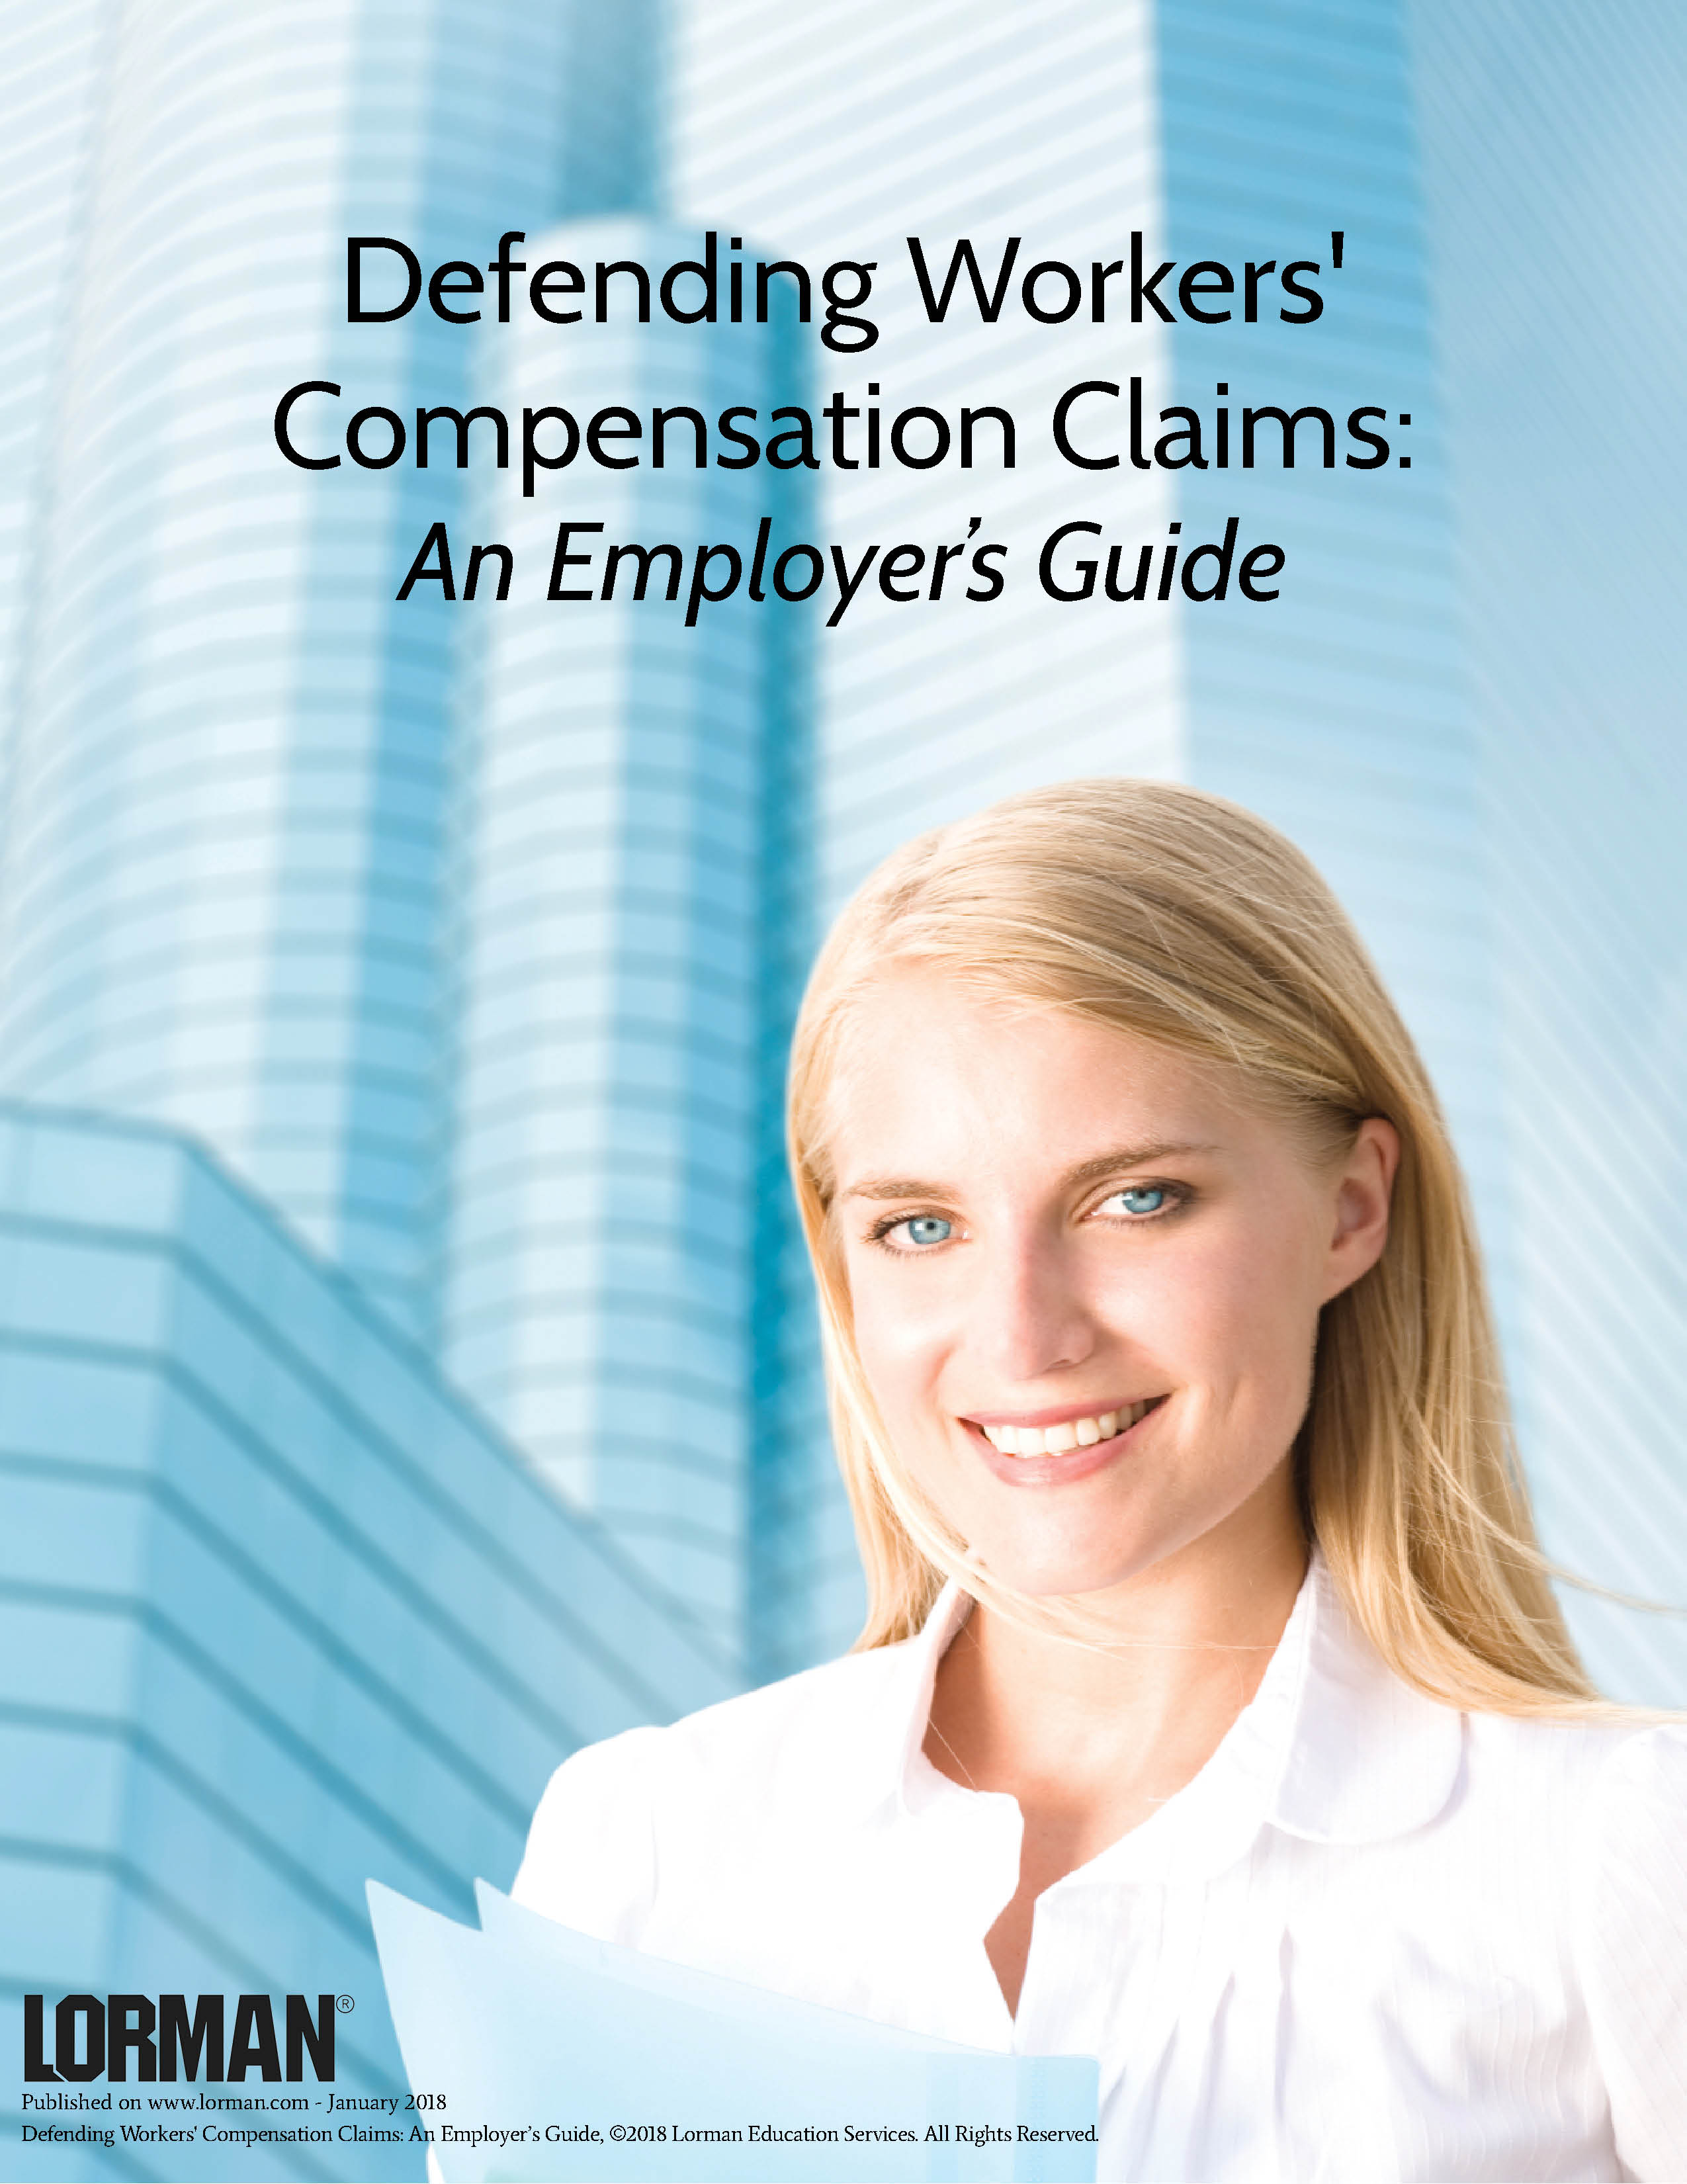 Defending Workers' Compensation Claims: An Employer’s Guide